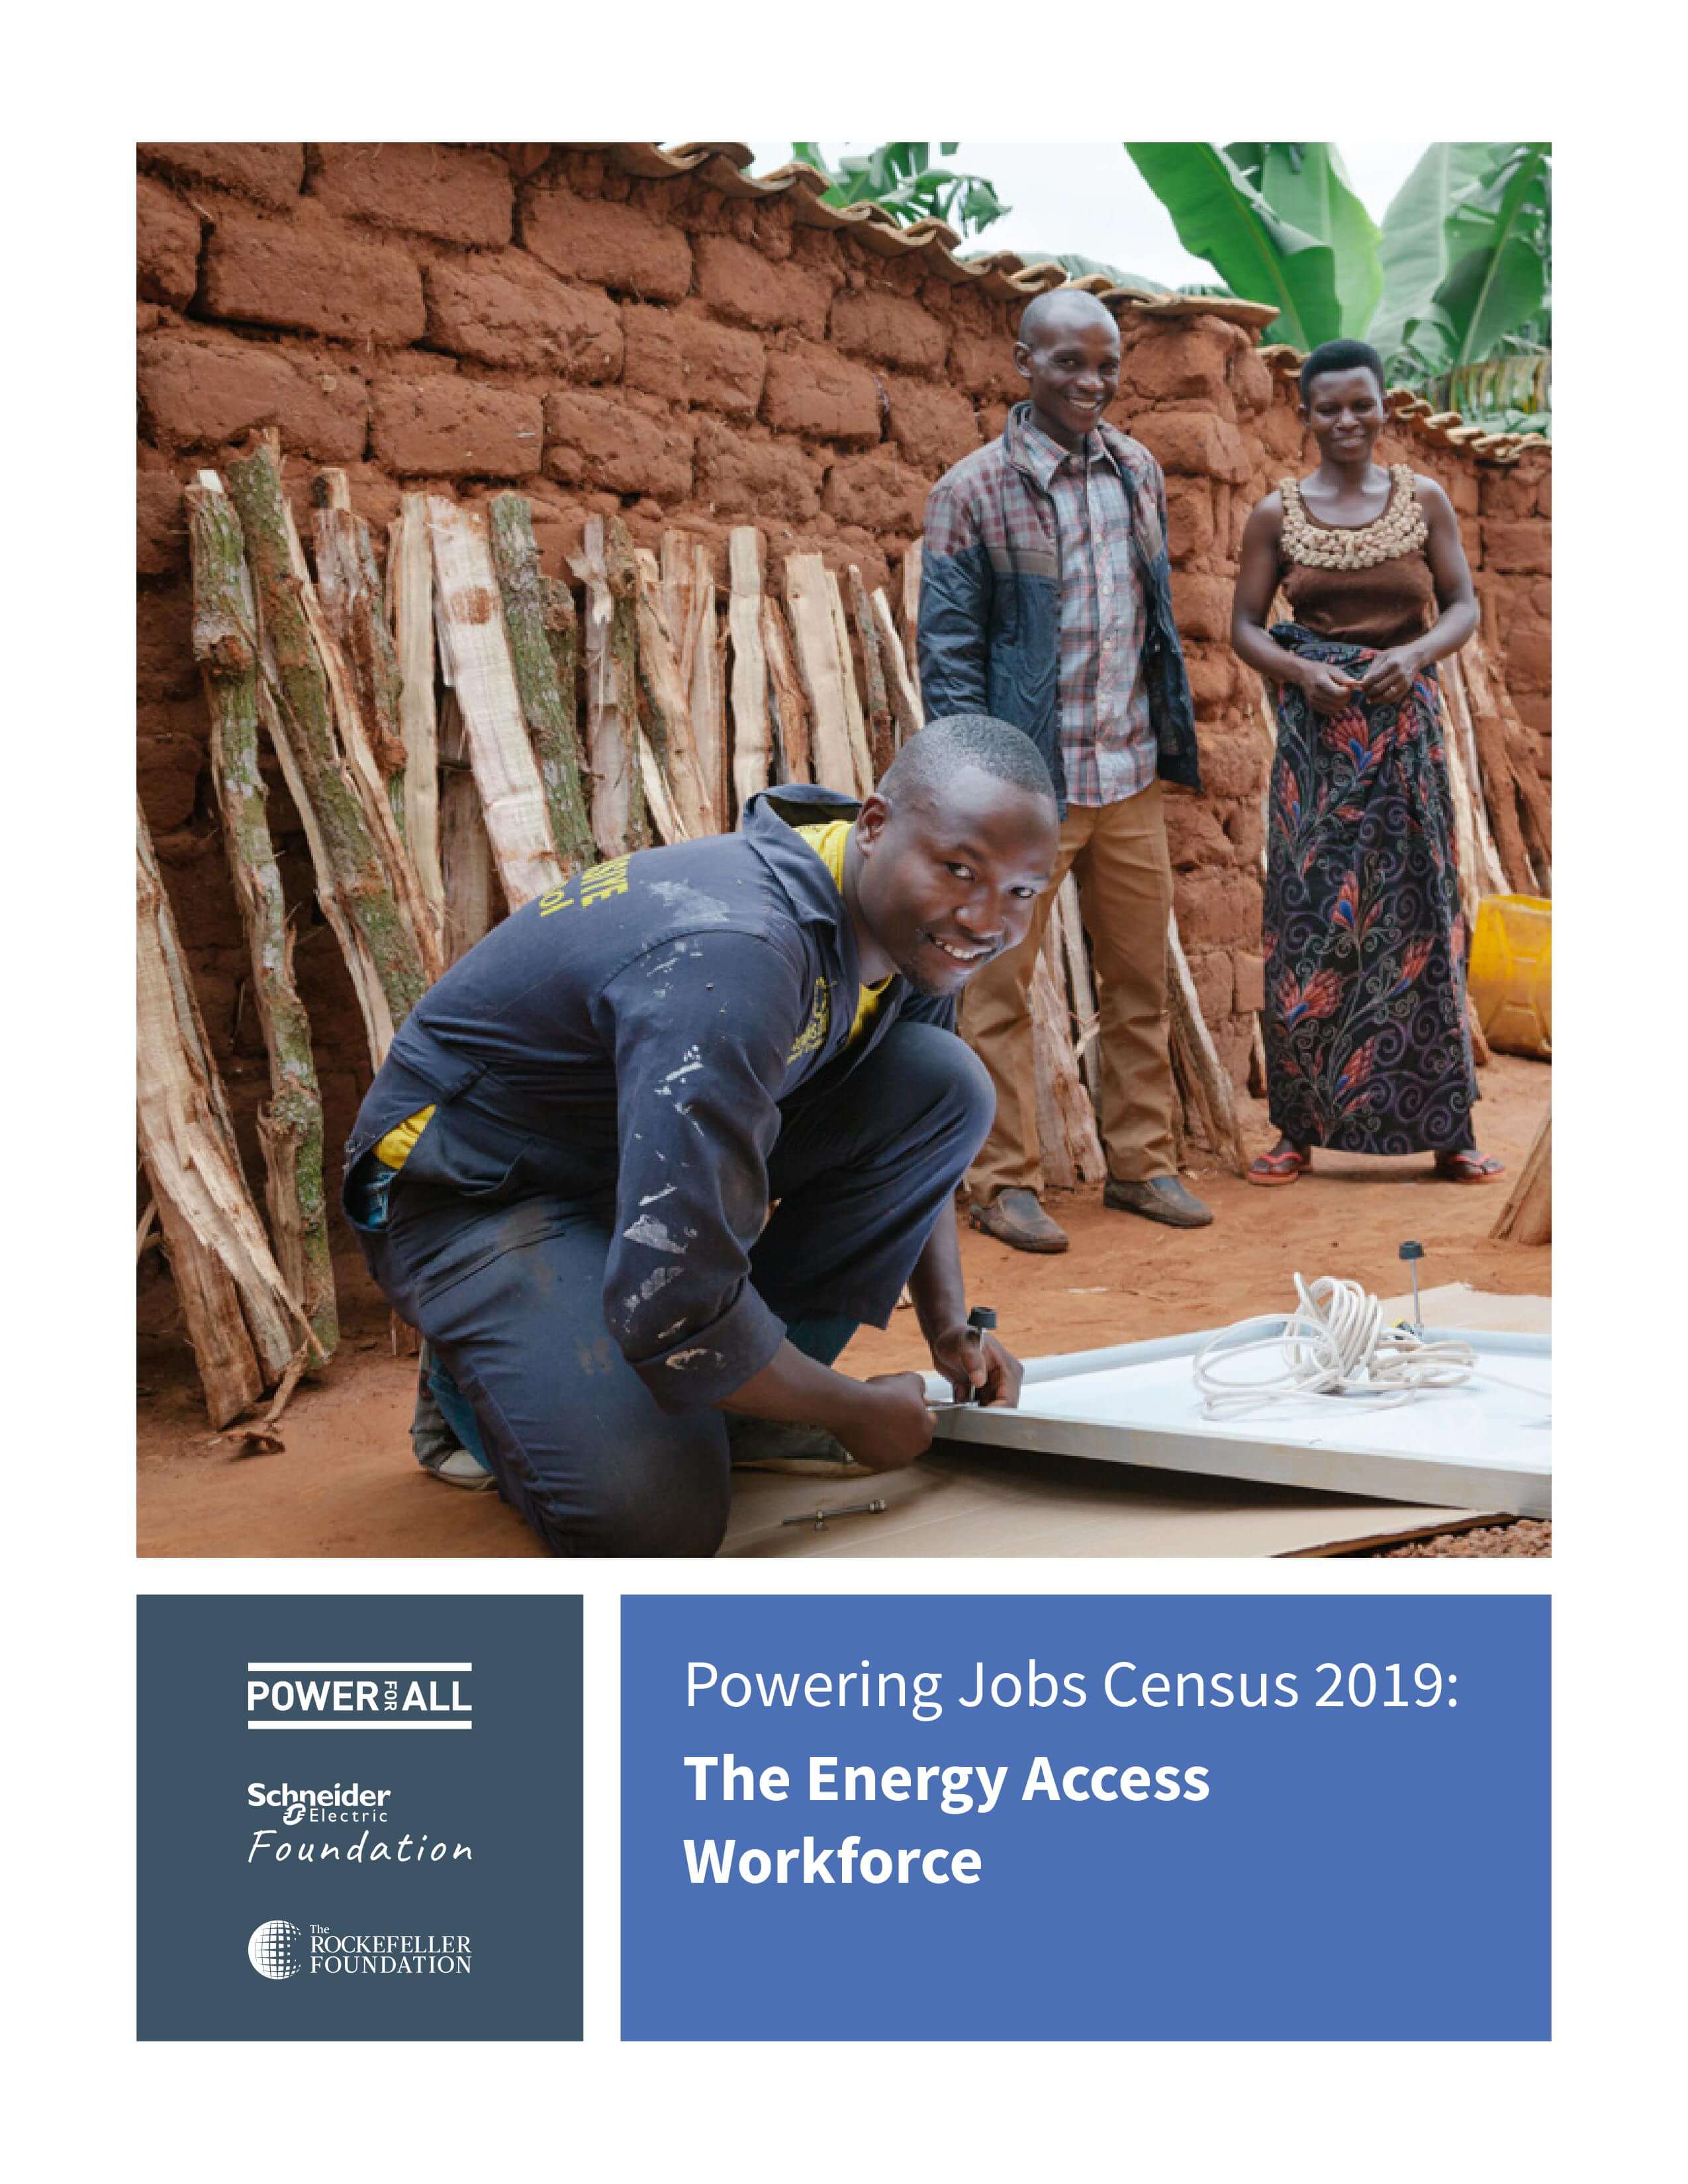 Renewable Energy Jobs in Sub-Saharan Africa and Asia 2019